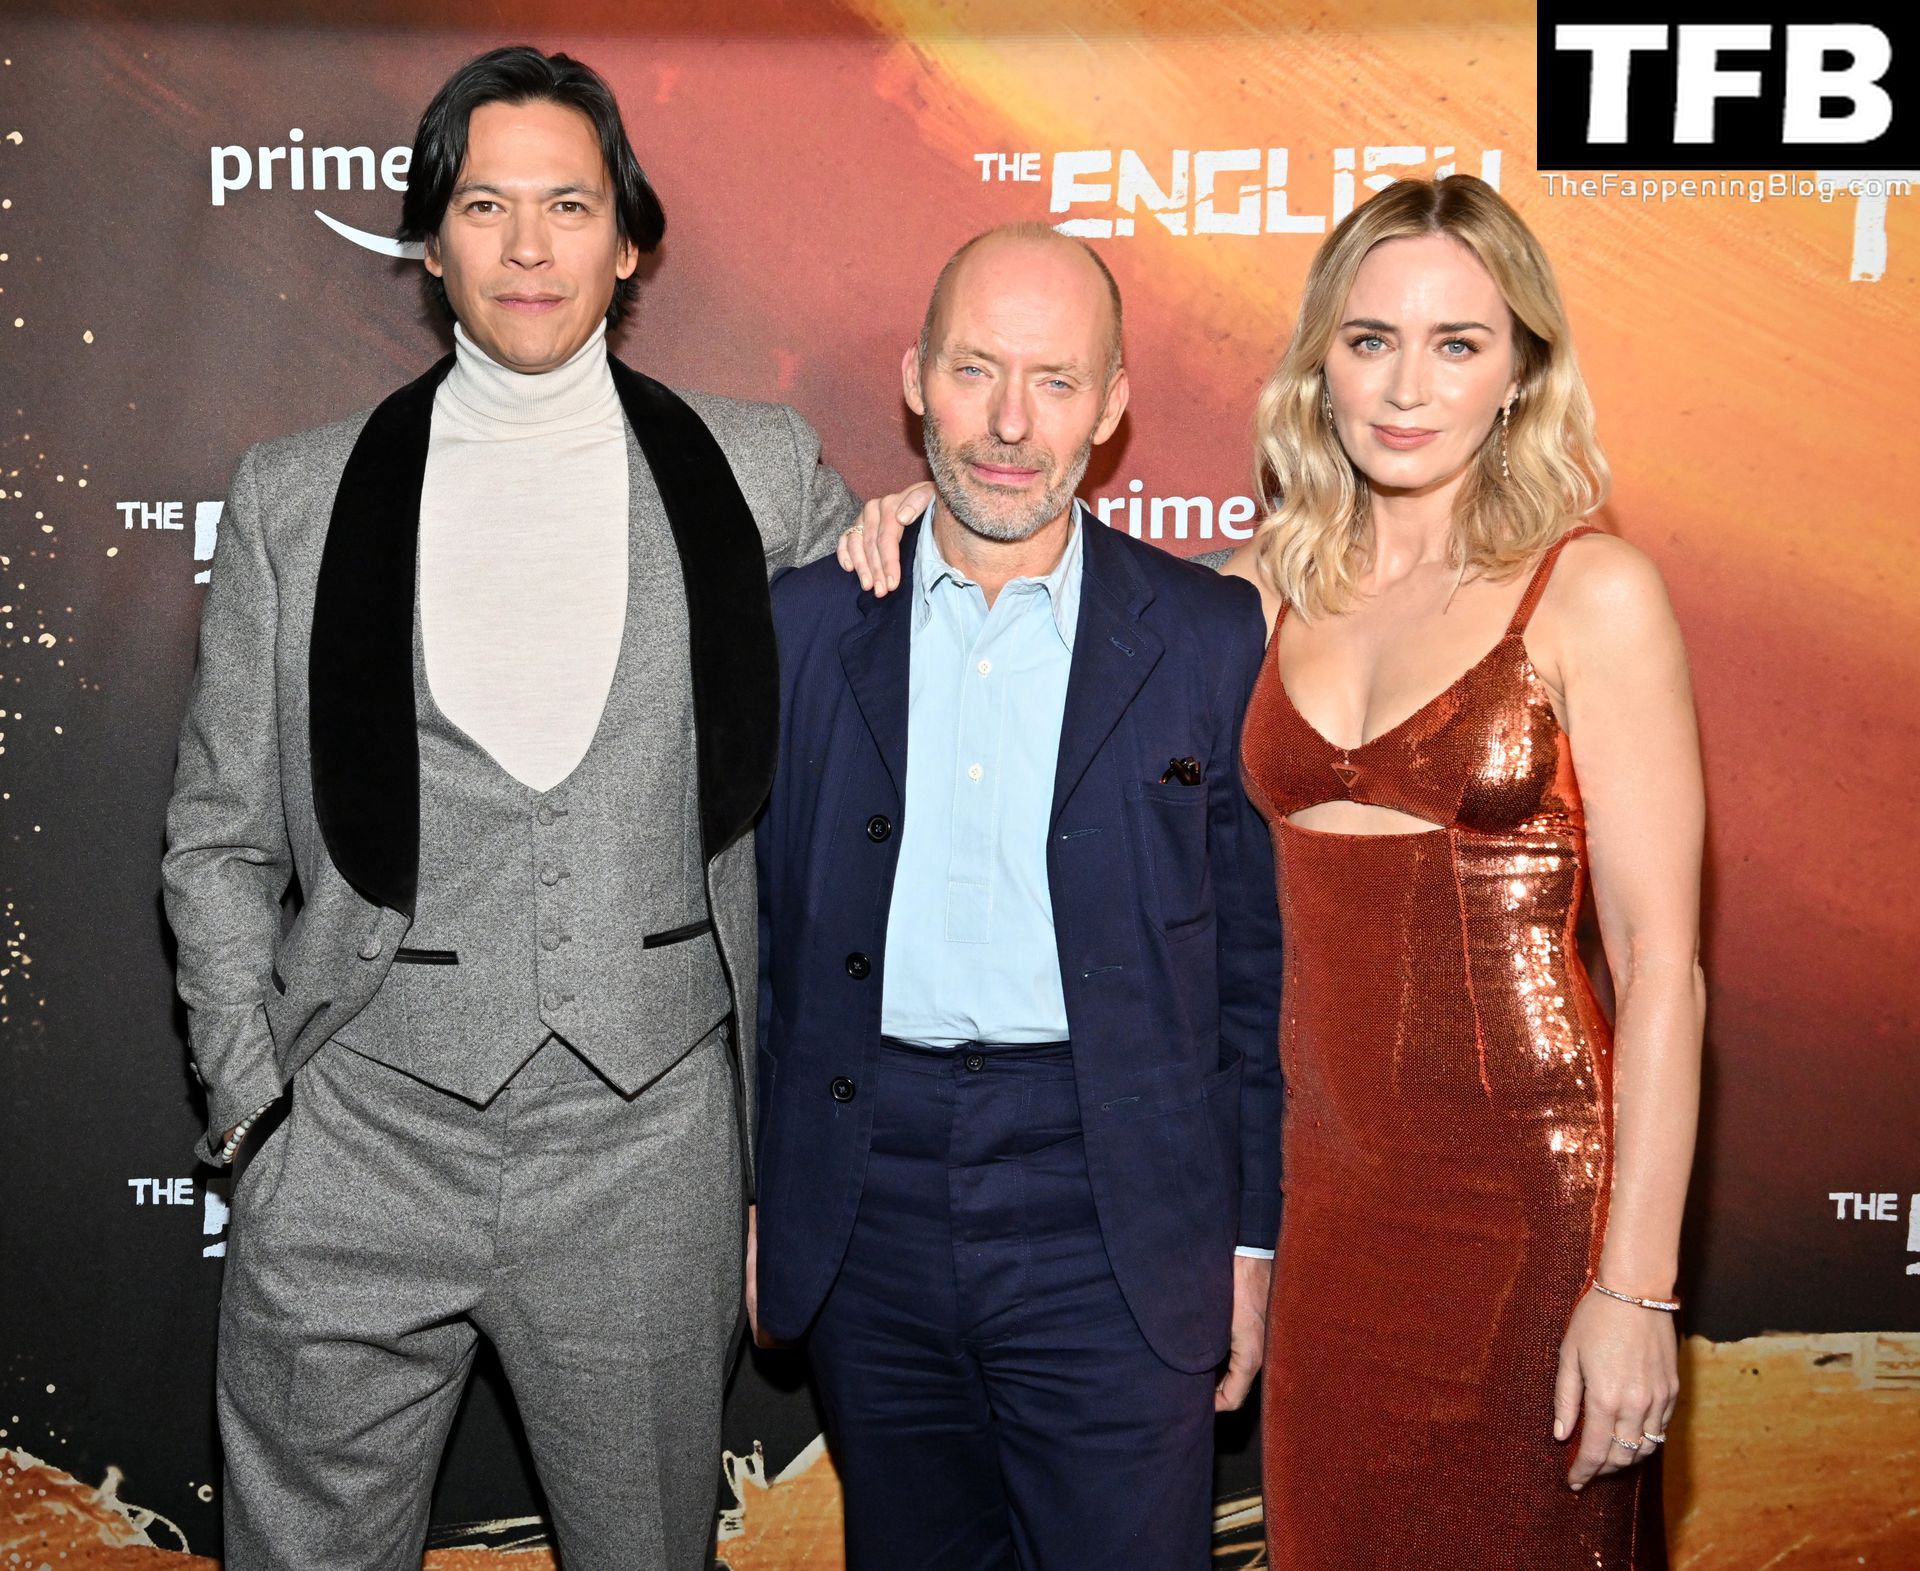 Emily Blunt Shows Off Her Sexy Breasts at “The English” New York Premiere (16 Photos)